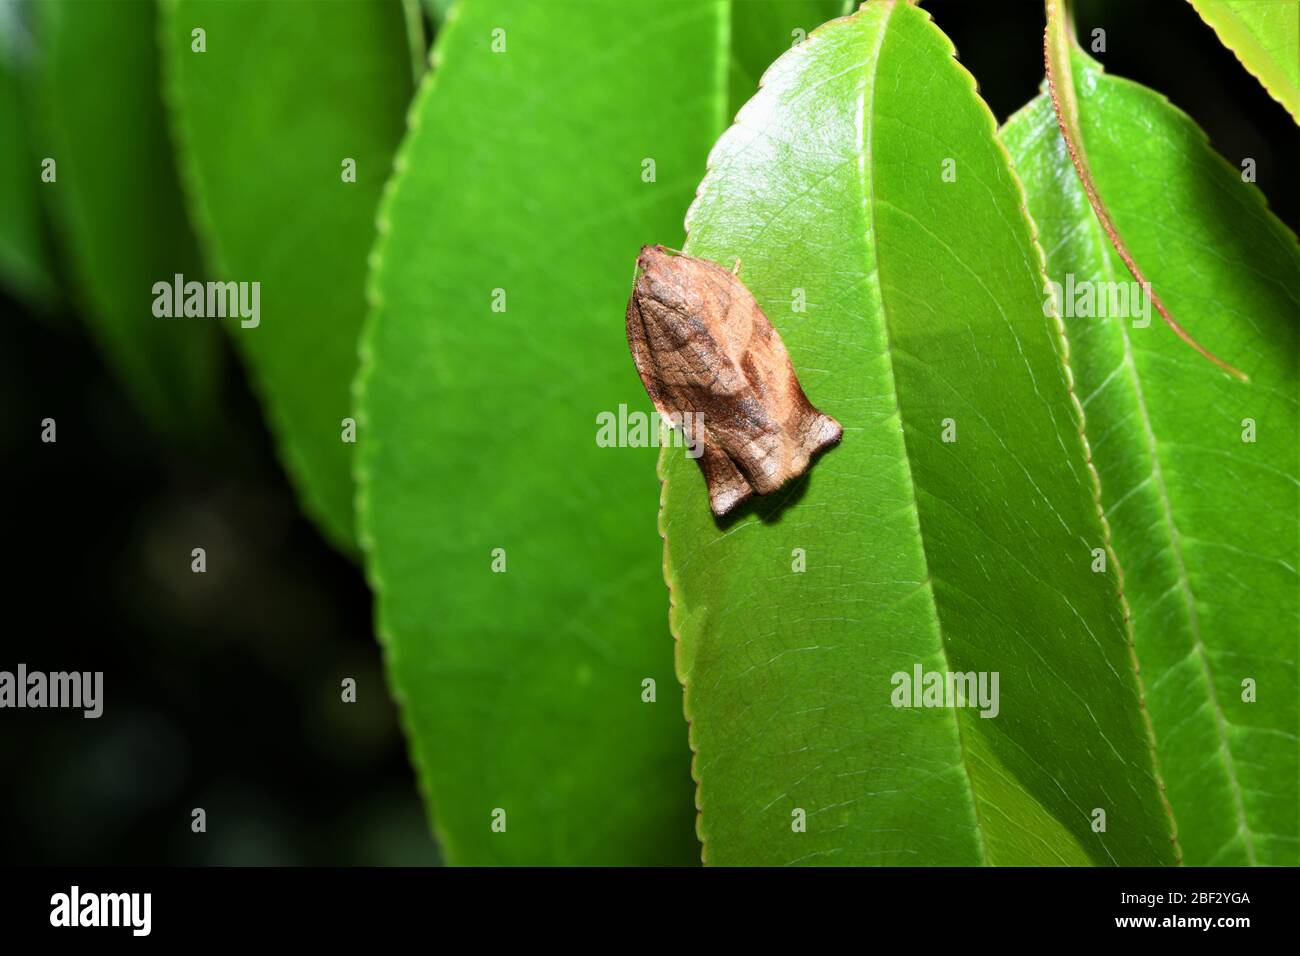 Small brown flying insect. Stock Photo